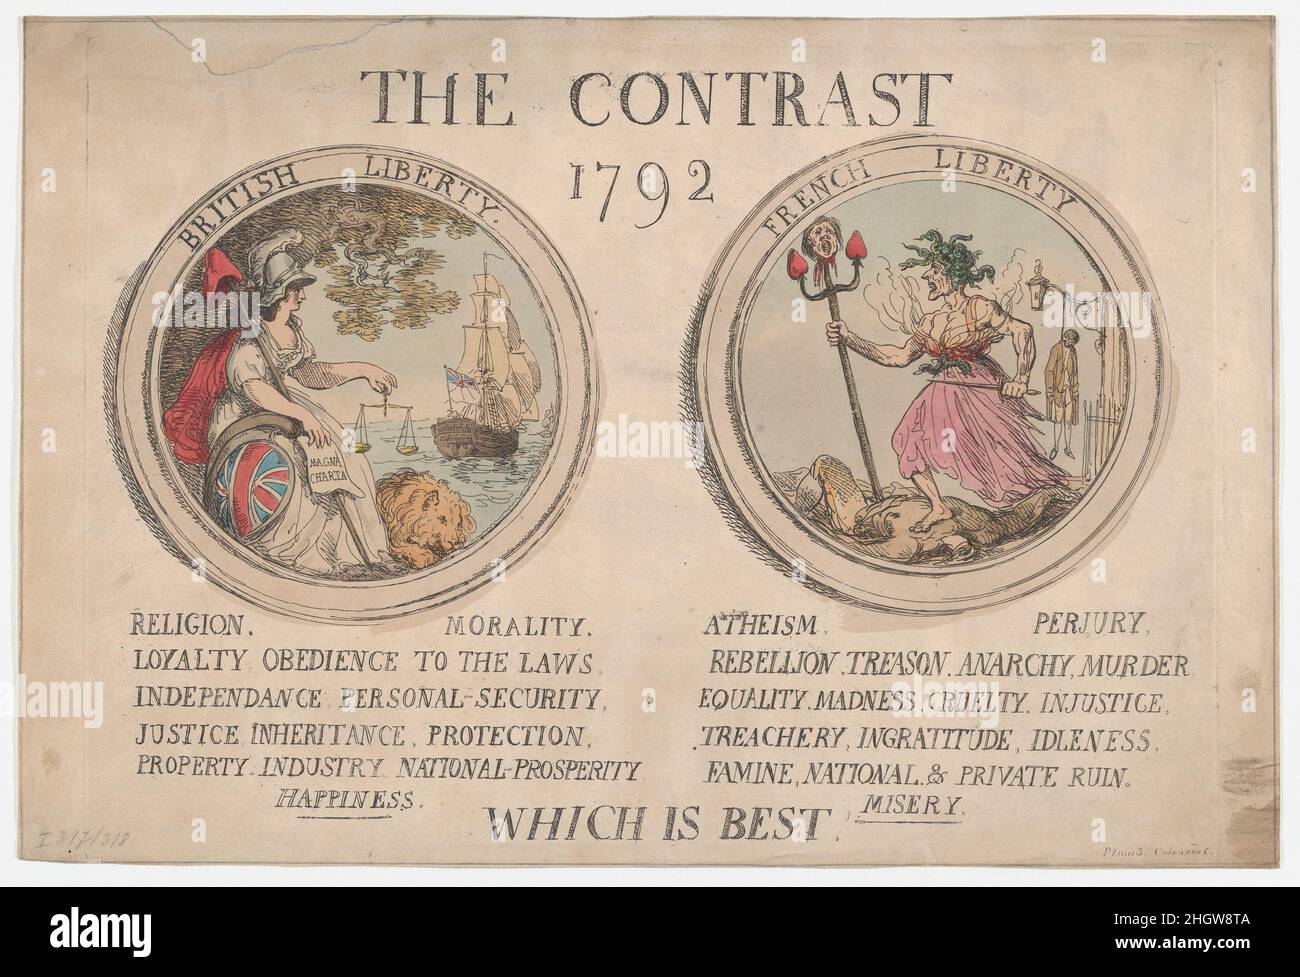 The Contrast December 1792 Thomas Rowlandson. The Contrast. December 1792. Etching. Prints Stock Photo